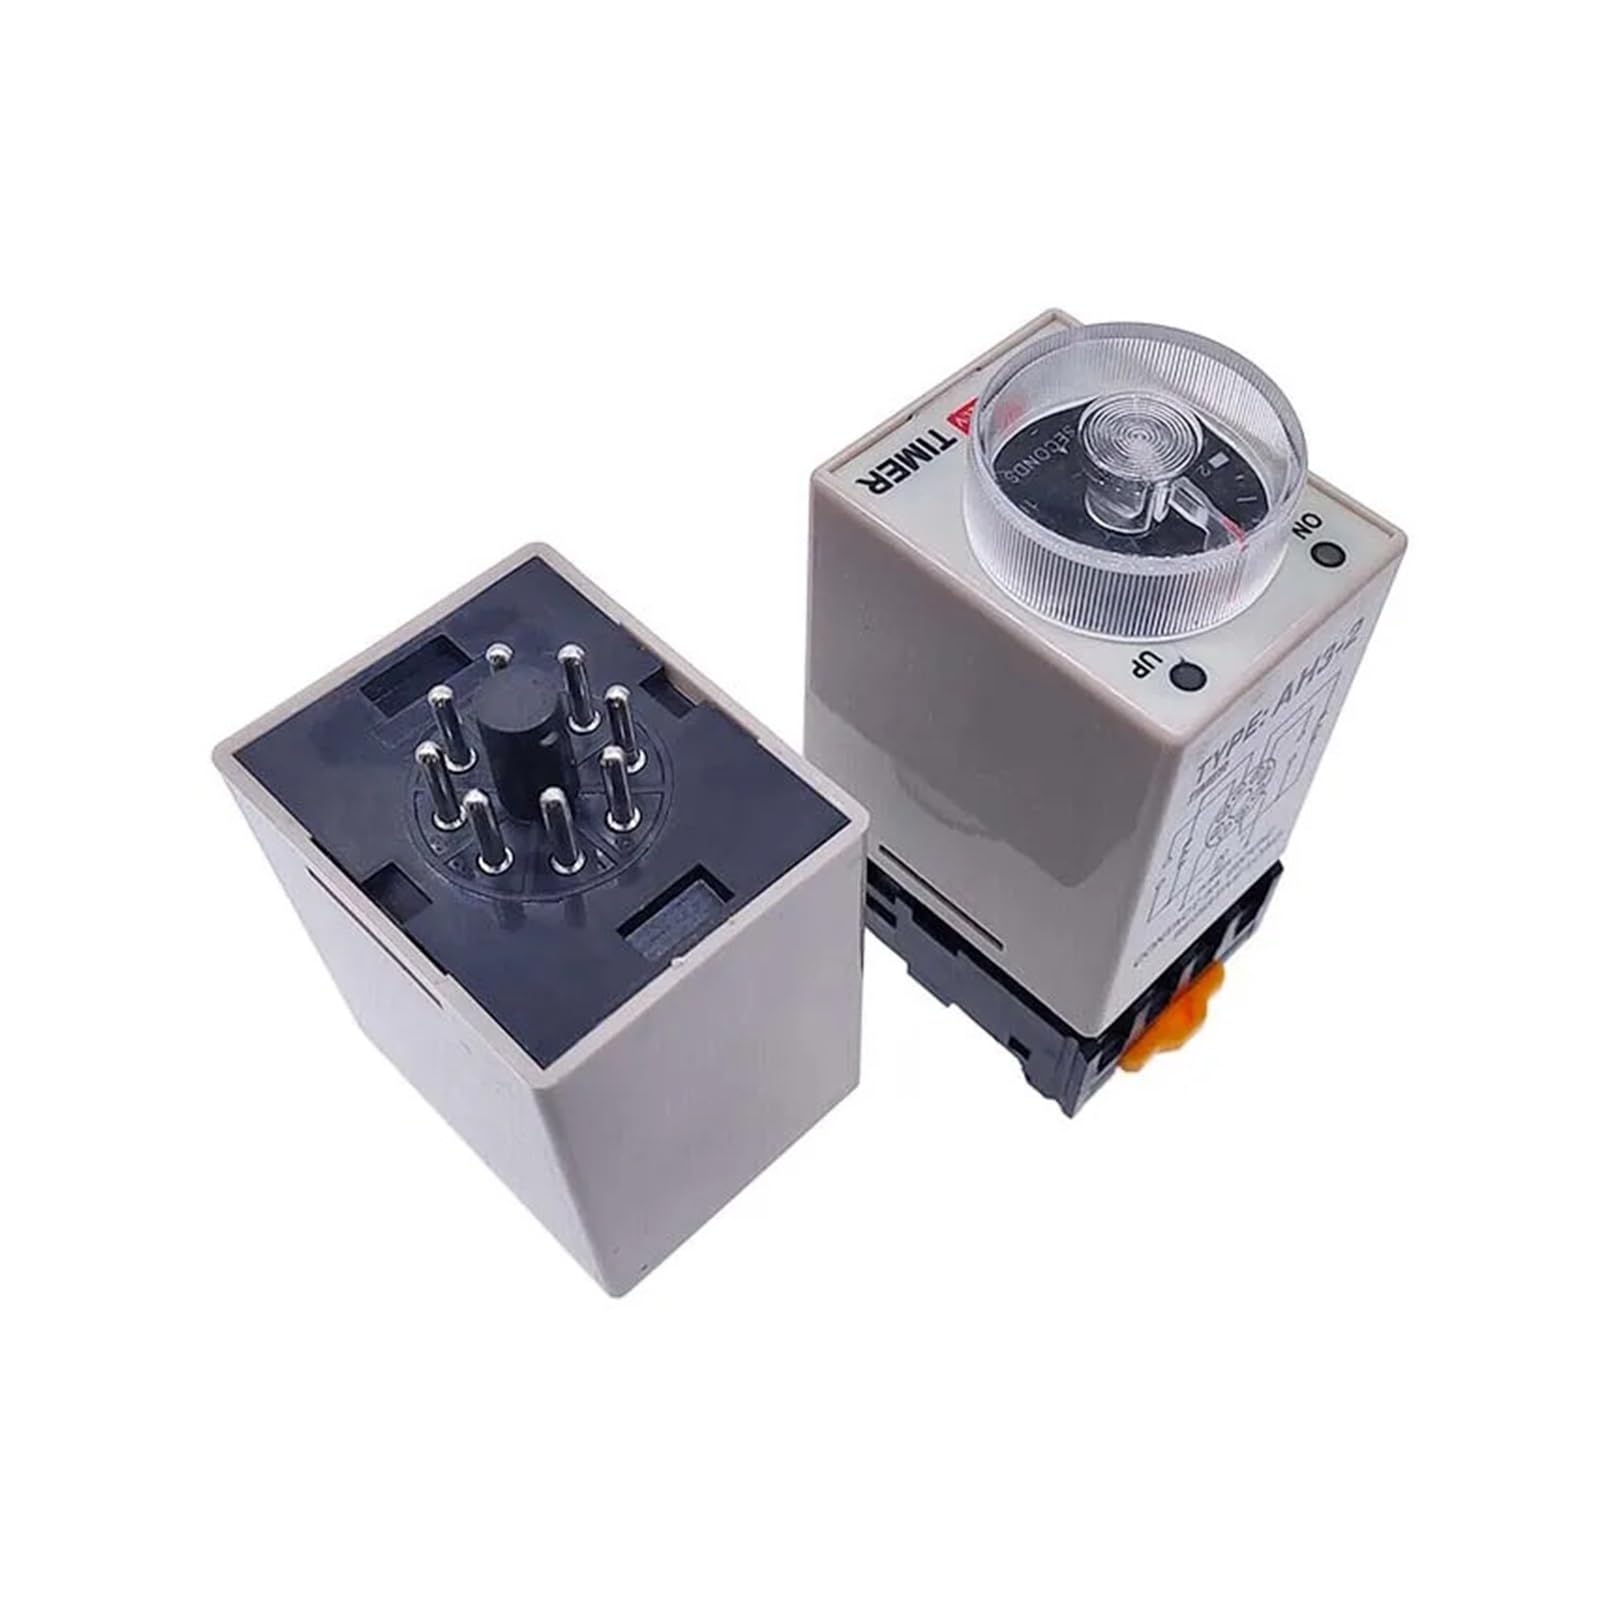 1 PC AH3-2 Power-on Delay Timer AH3-3 Time Relay AC Thick Stitch Time Set Range 1S/5S/10S/30S/60S/5M/10M/30M LABDIP(AC110V,AH3-3 0-6Seconds) von LABDIP